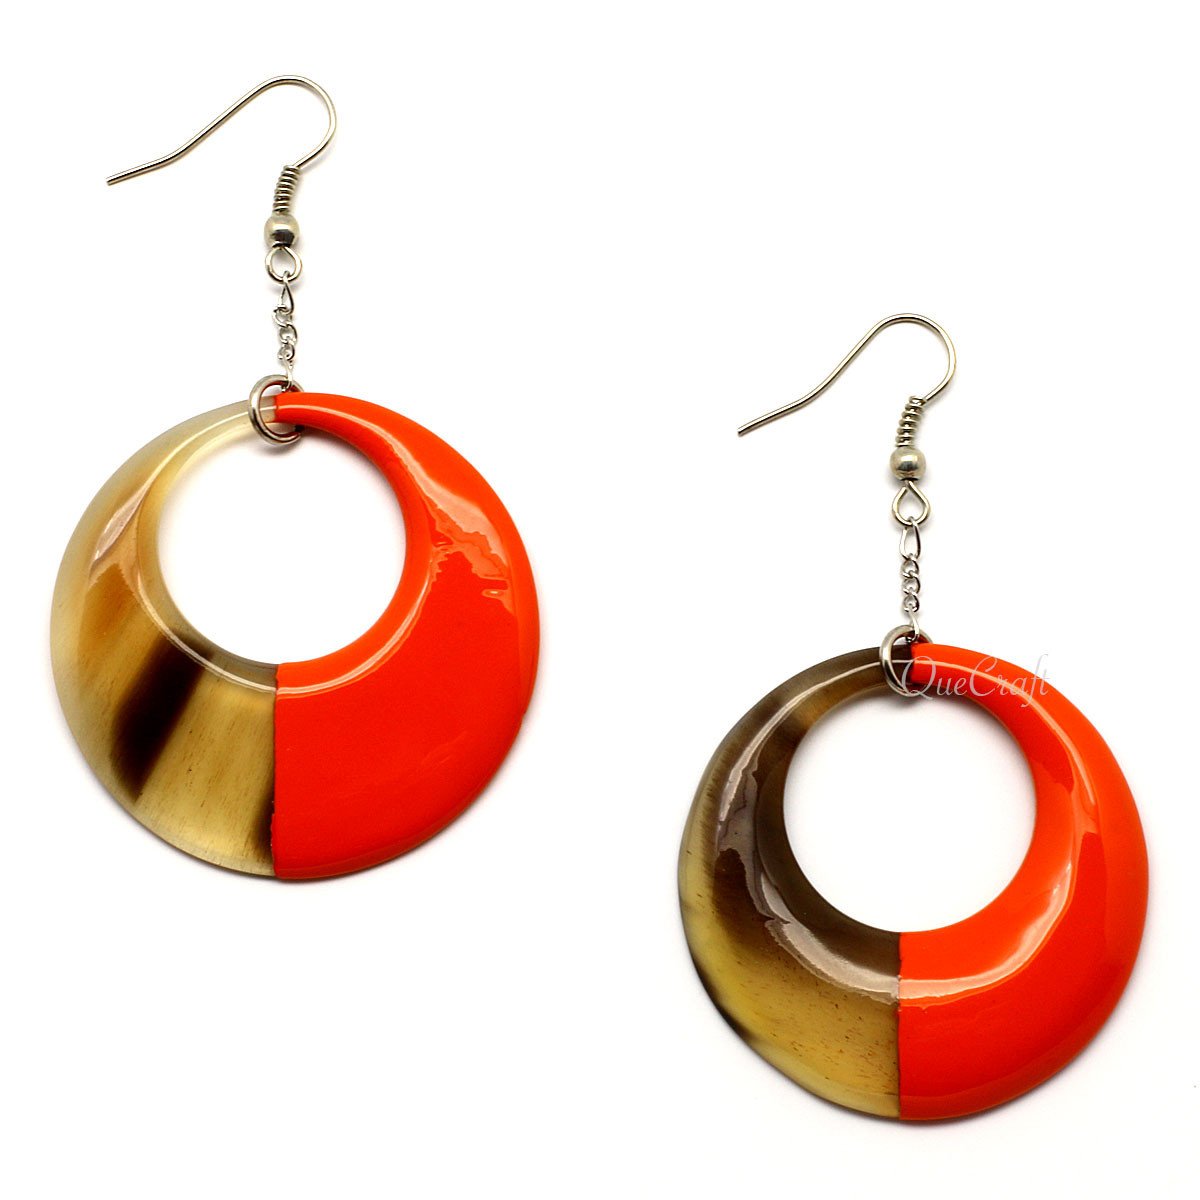 Horn & Lacquer Earrings #5117 - HORN JEWELRY